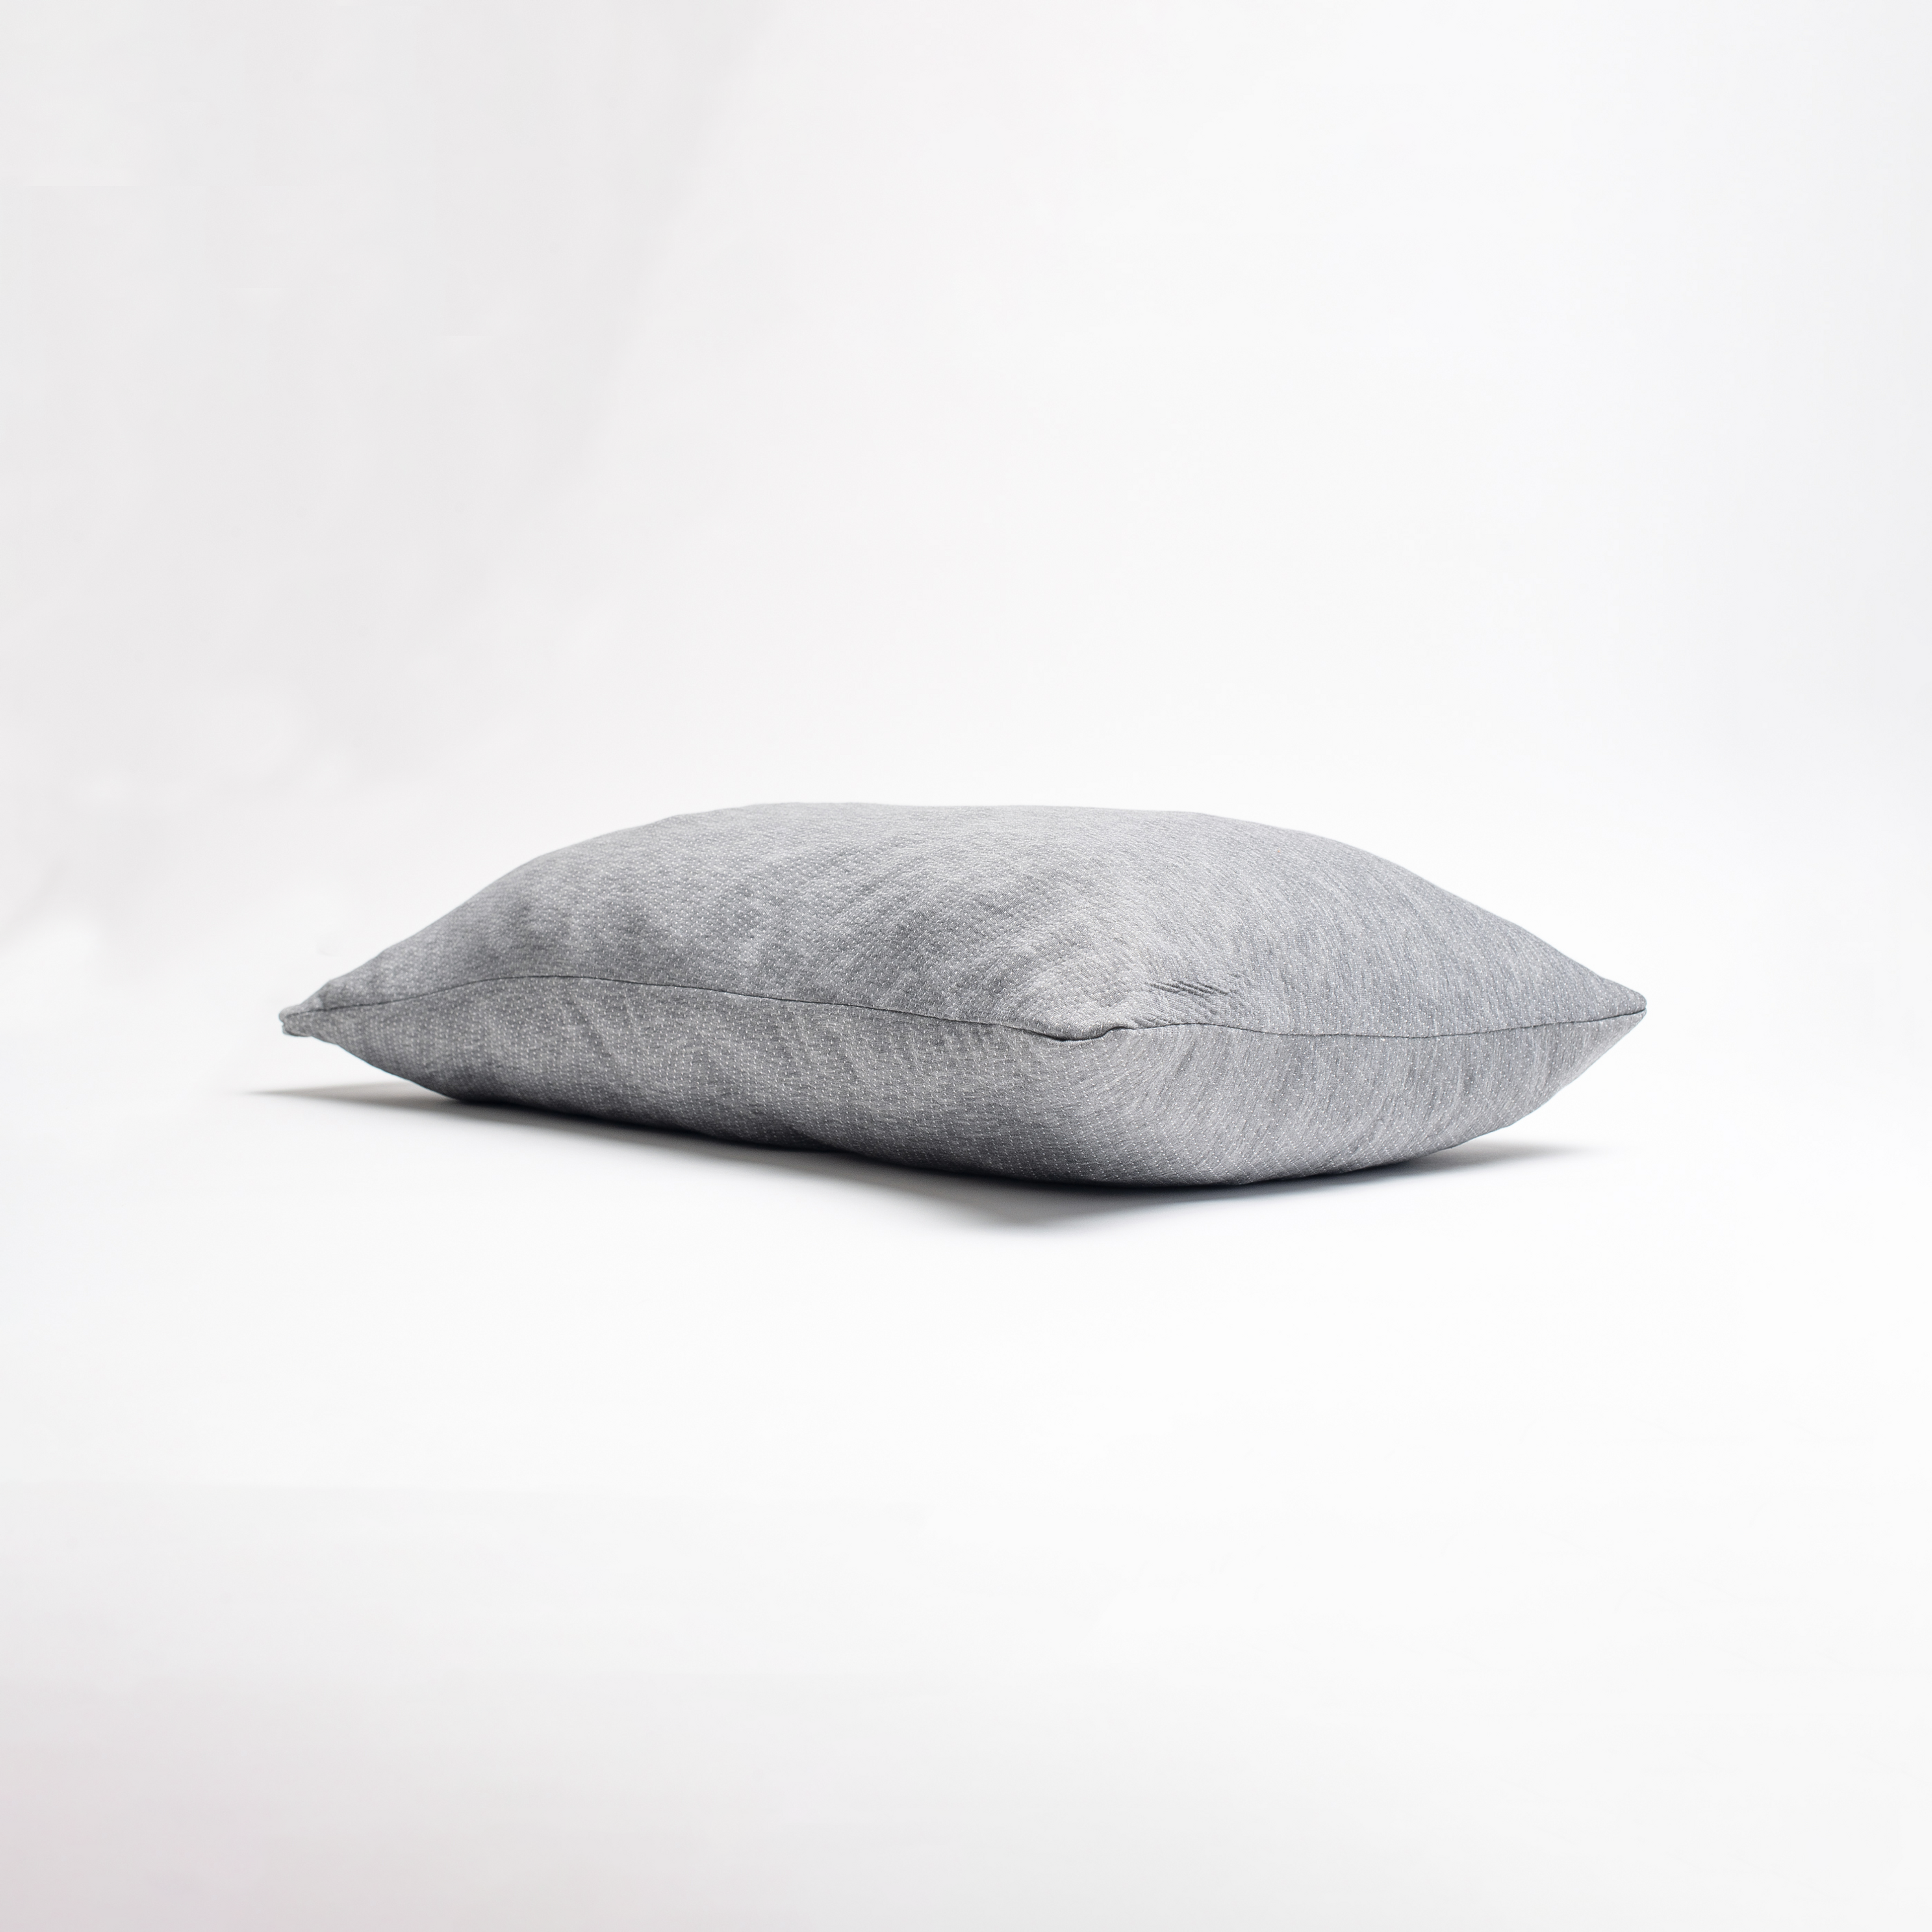 Dosaze Adjustable Pillow (Made in the USA)